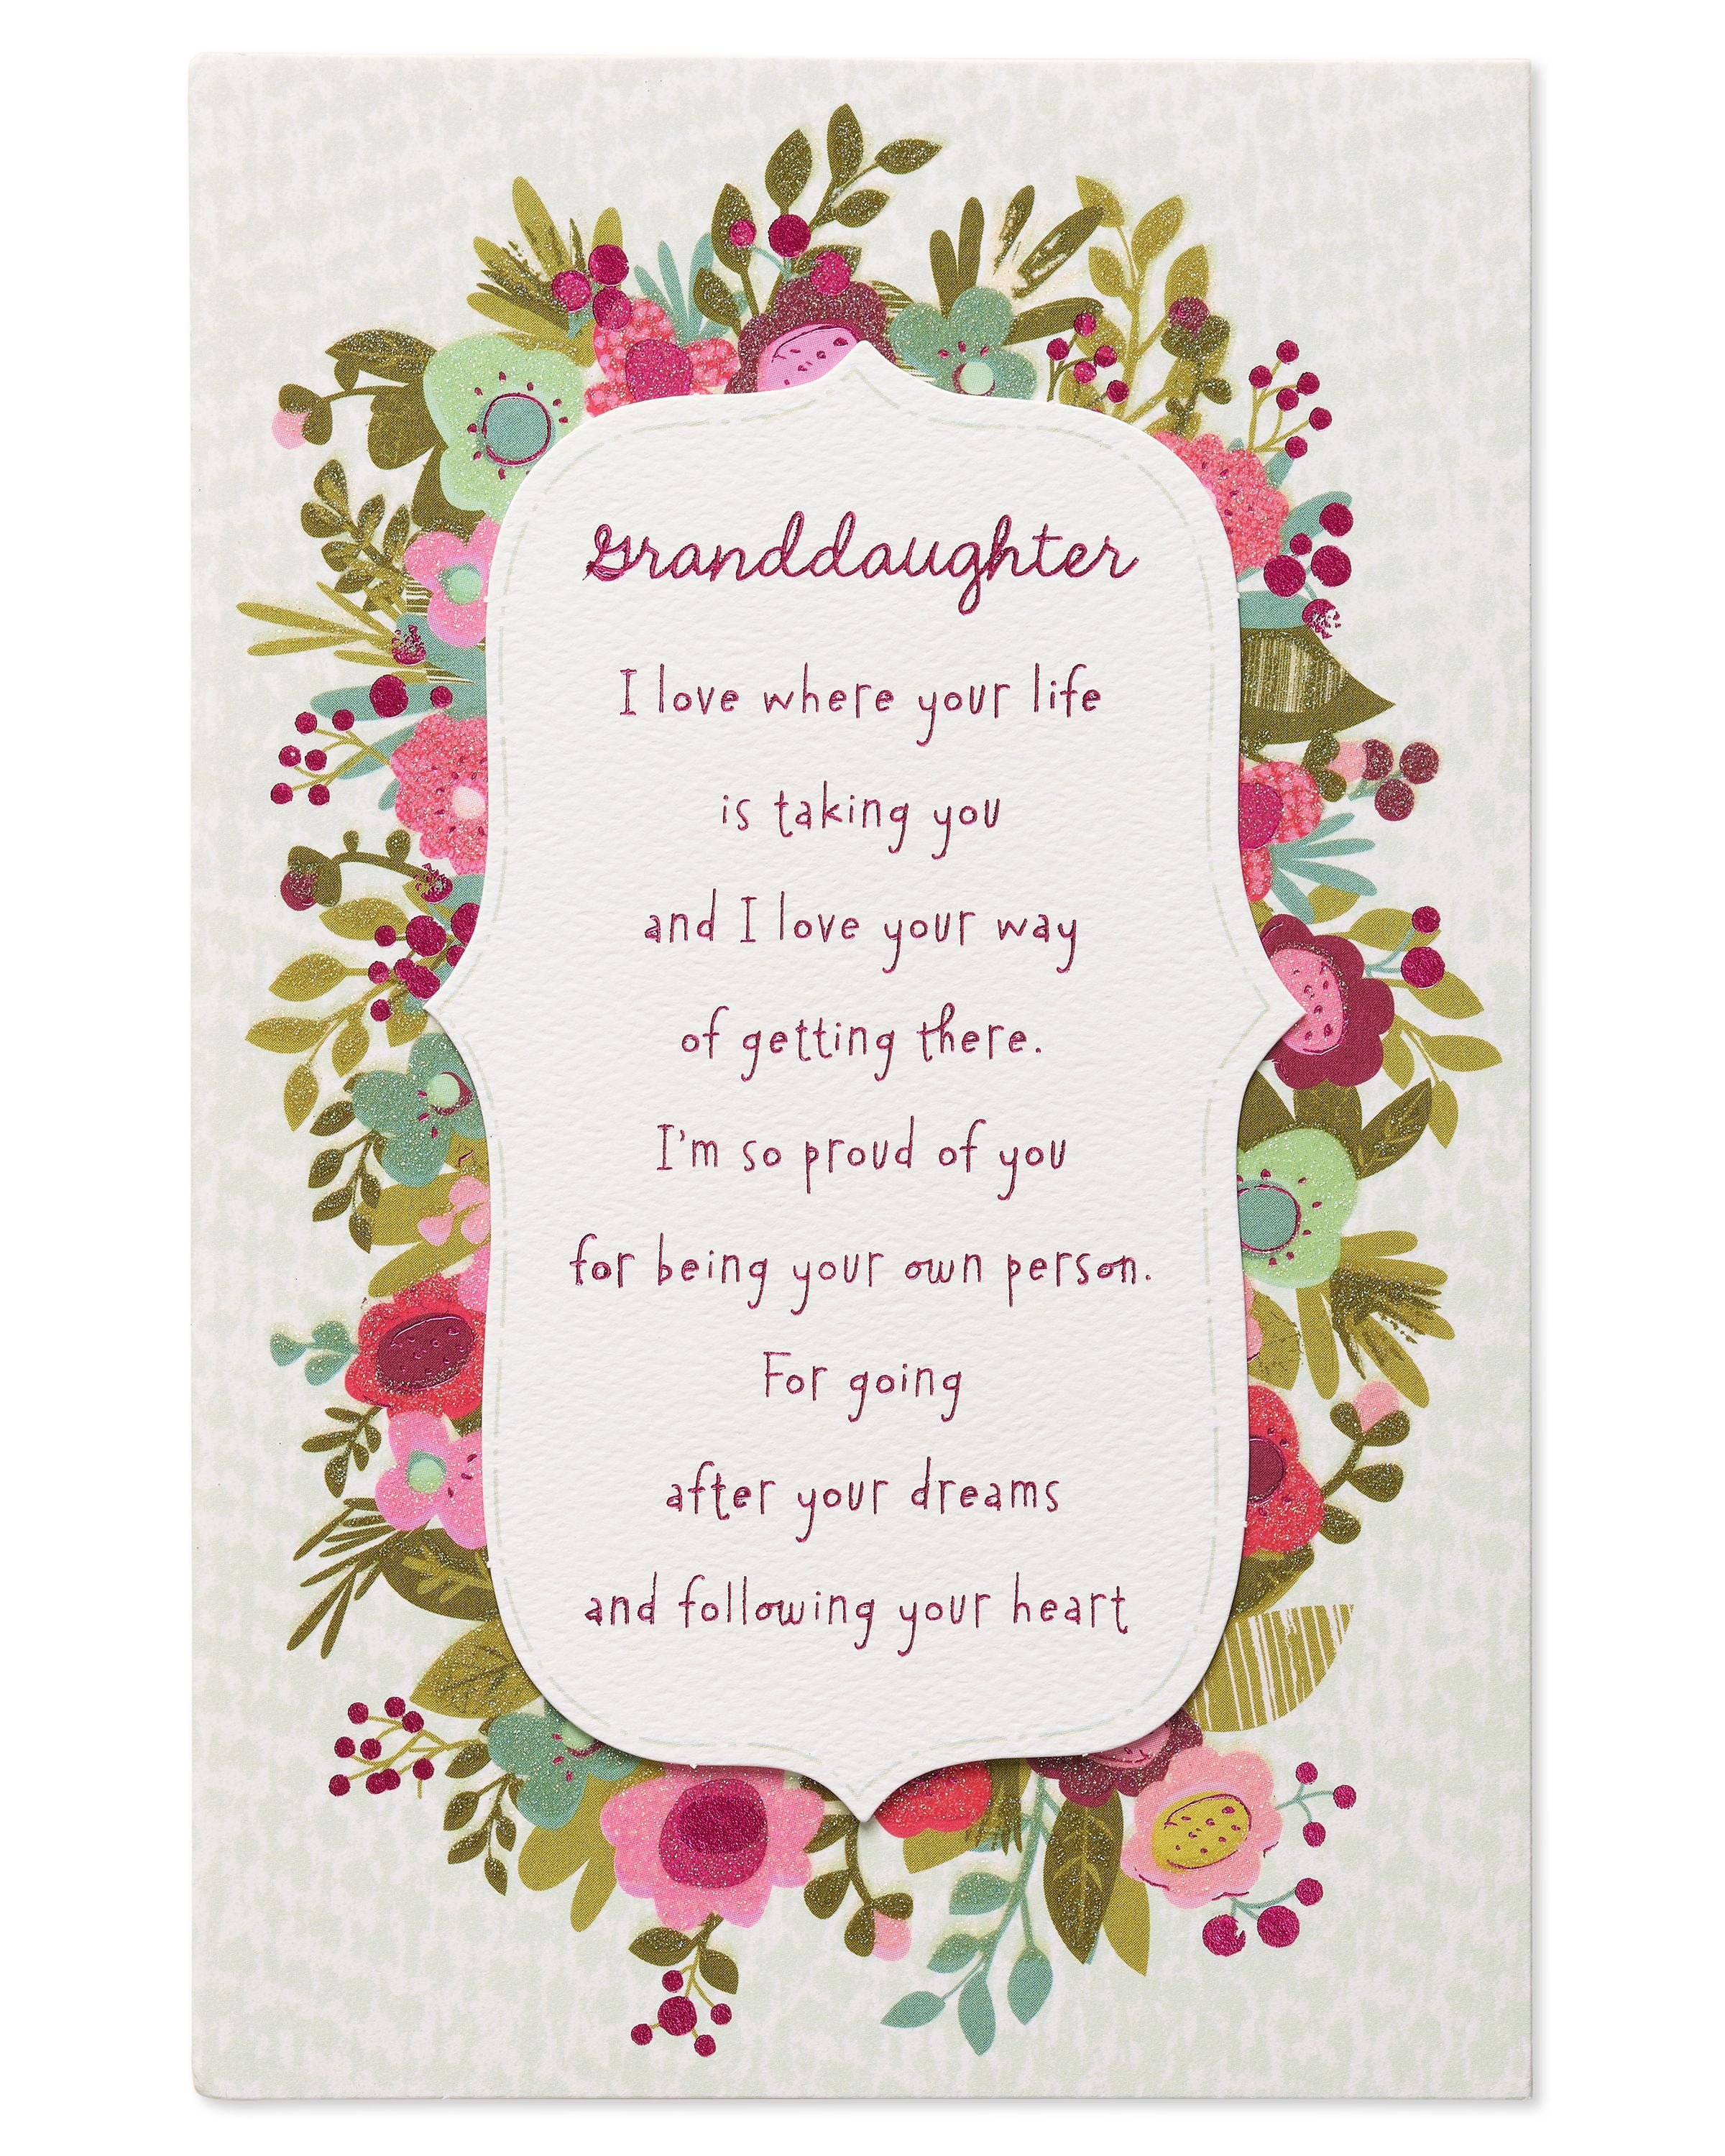 American Greetings Floral Birthday Card for Granddaughter with Glitter ...